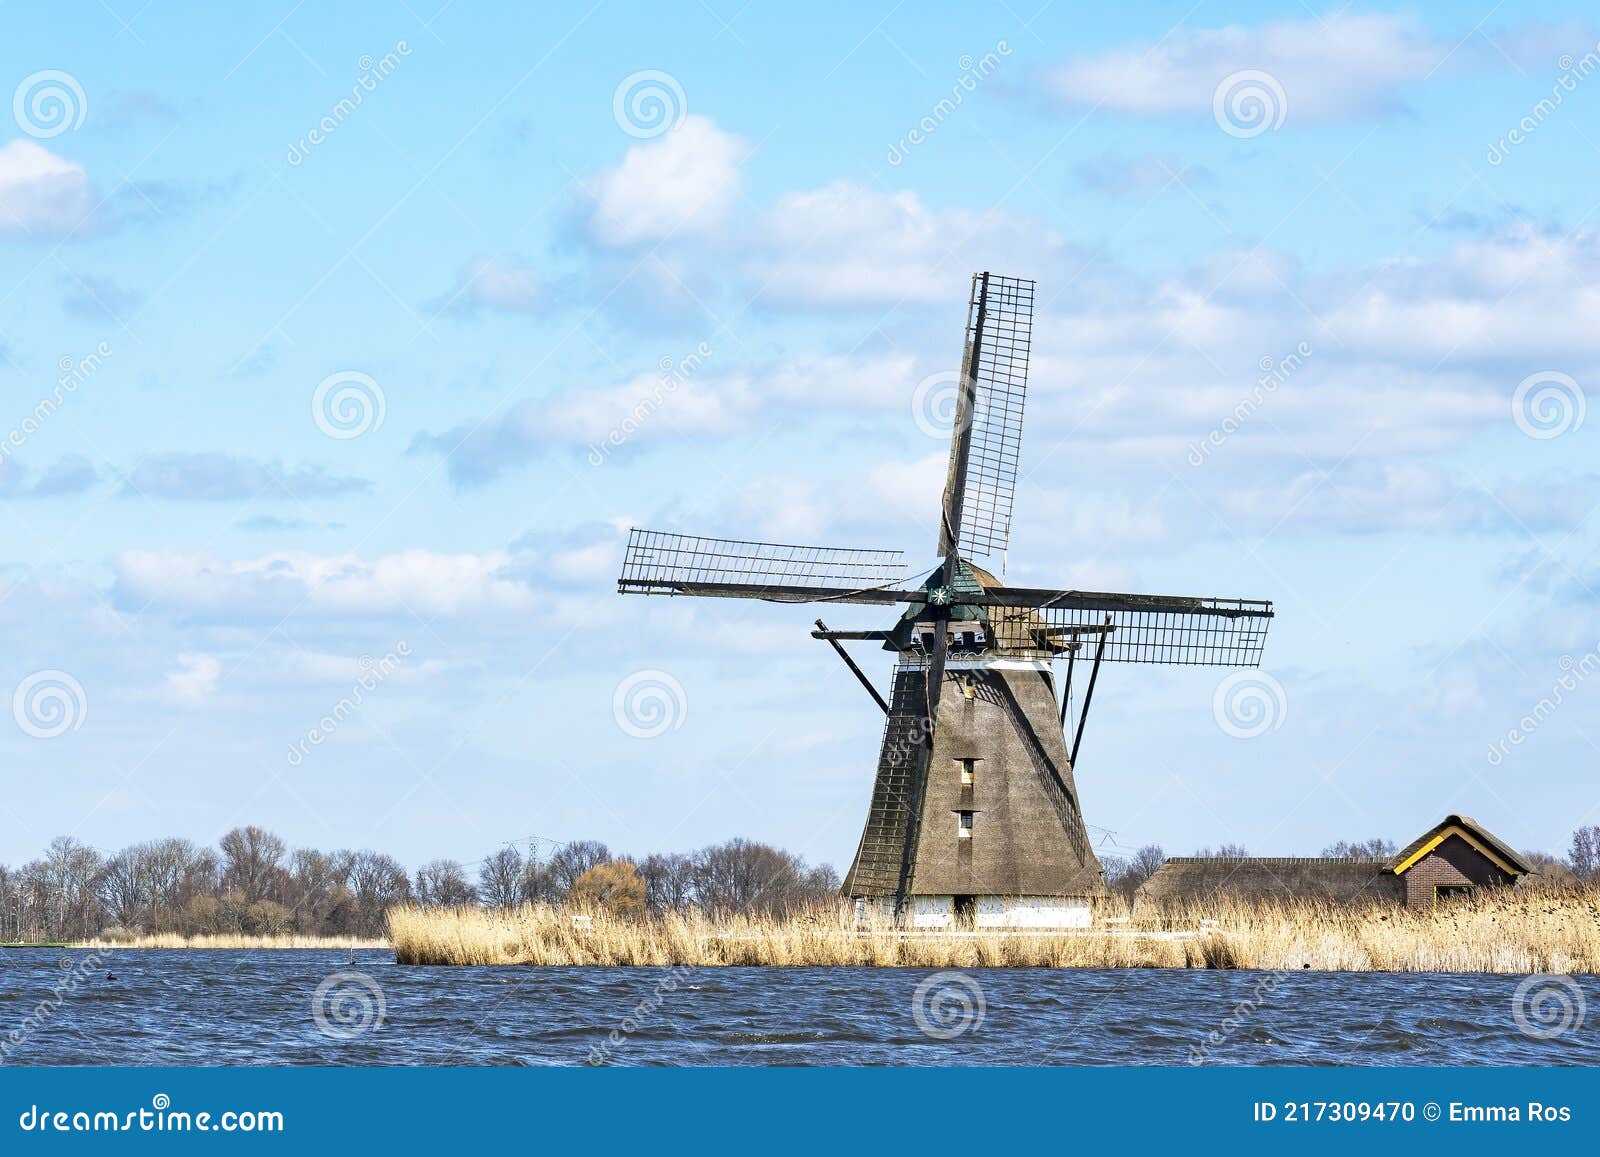 the windmill de korenmolen along the rough water of lake de rottemeren on a sunny but stormy day